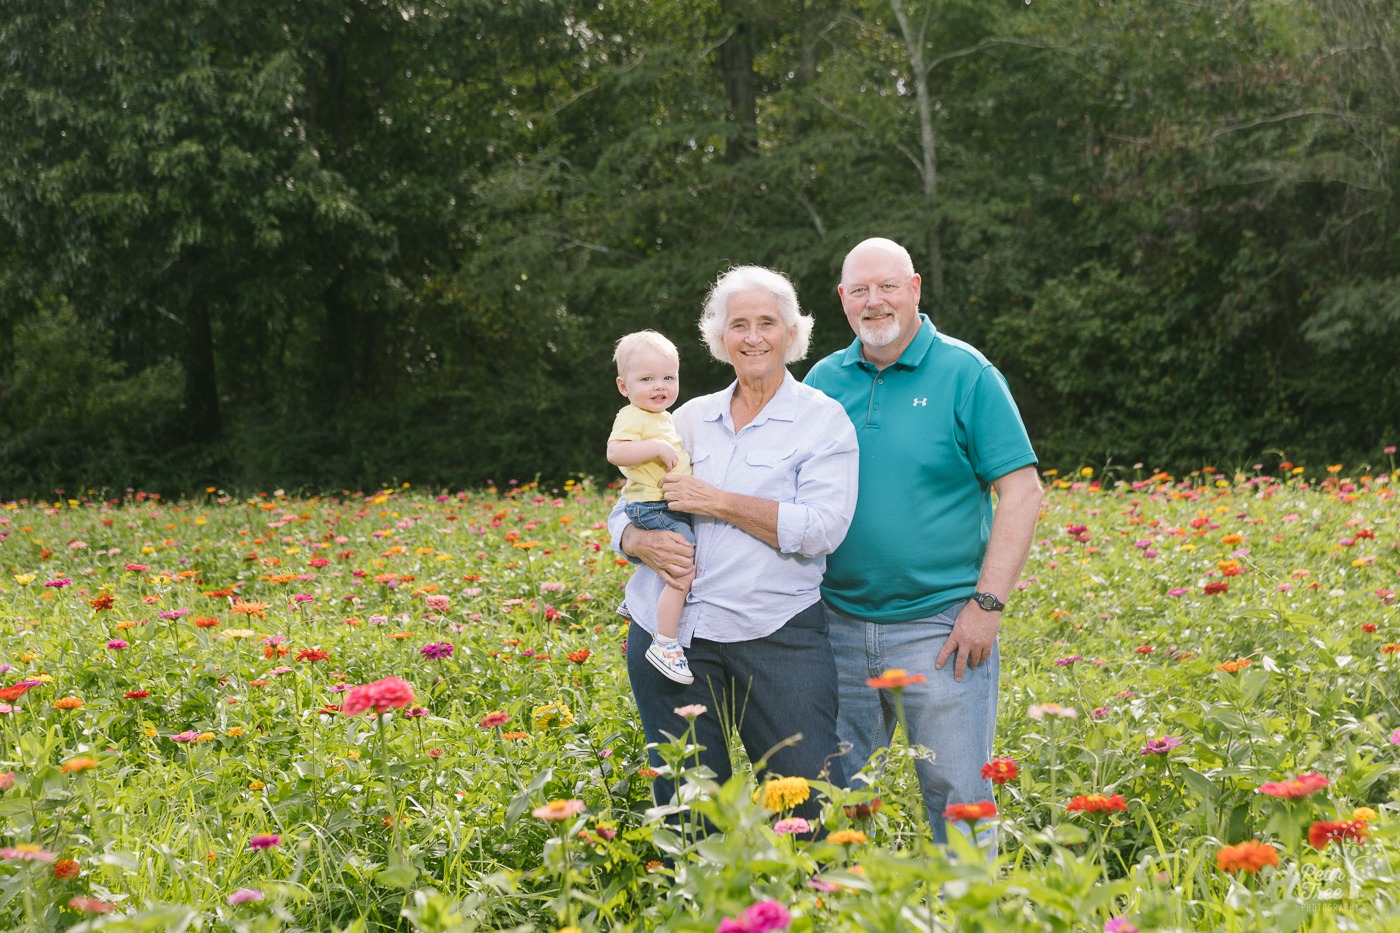 Grandparents holding their one year old grandson in a wildflower field